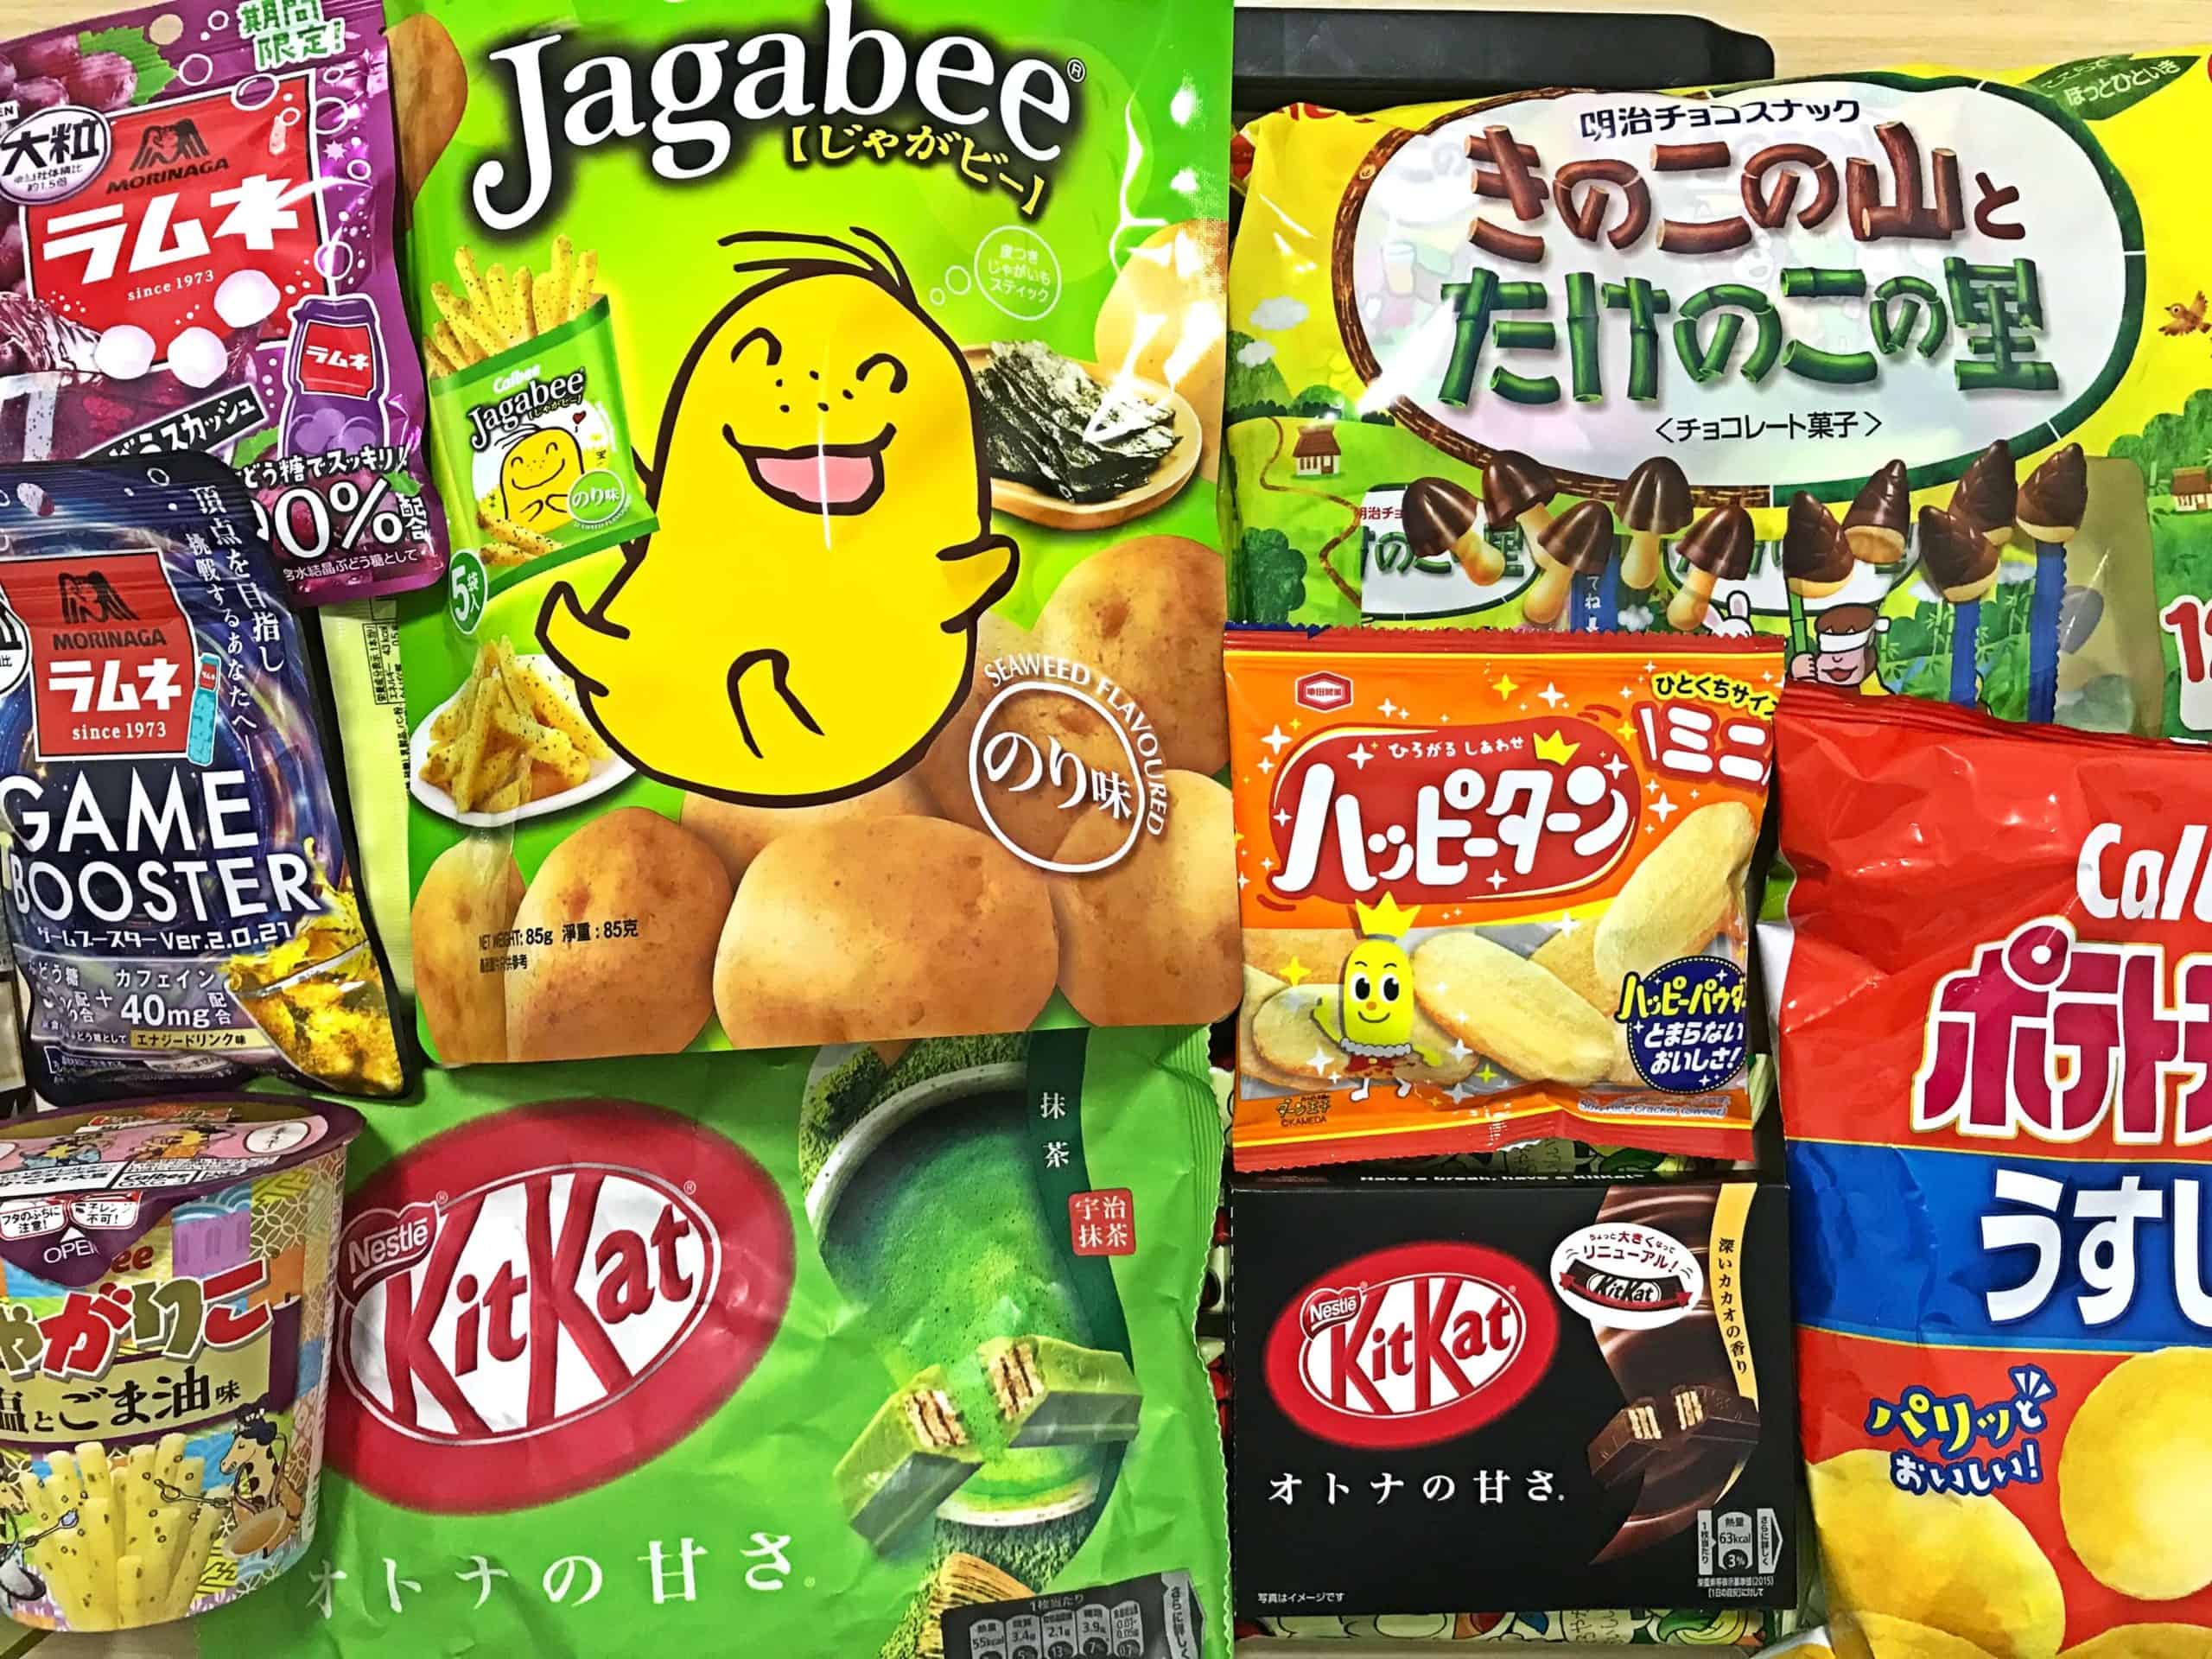 Super Yummy! 12 Most Popular Japanese Snacks You Must Try